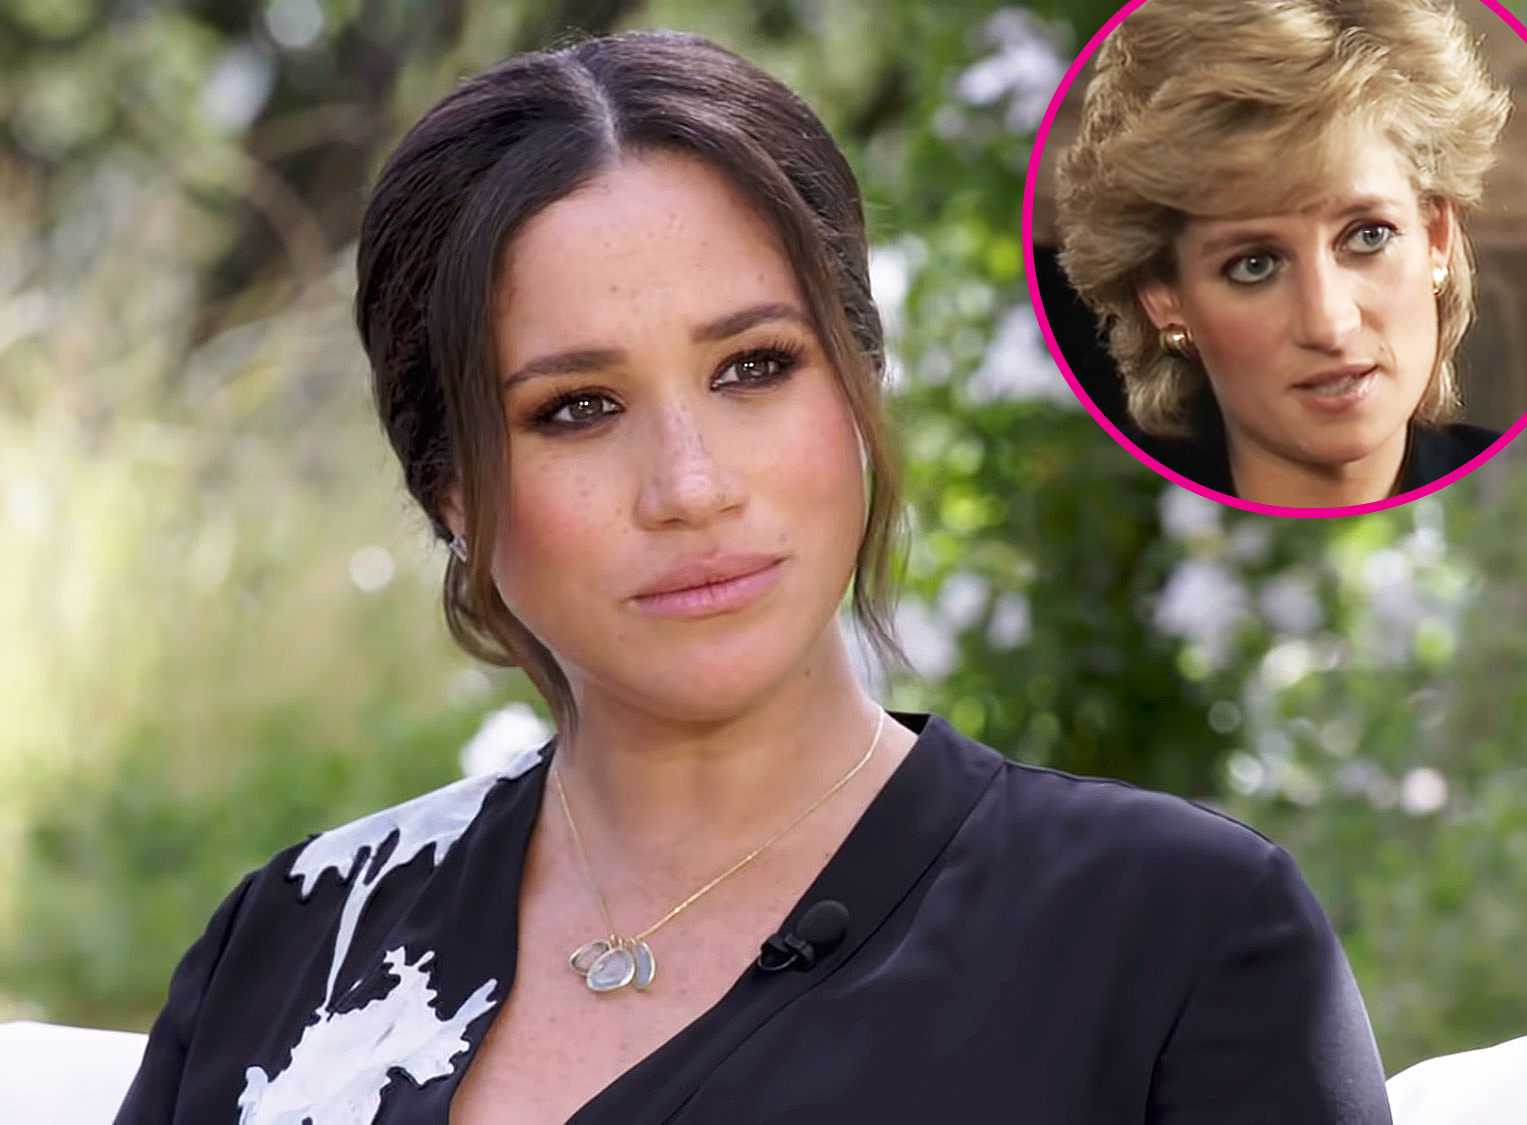 How Meghan Markle's Tell-All Compares to Princess Diana's 1995 Interview